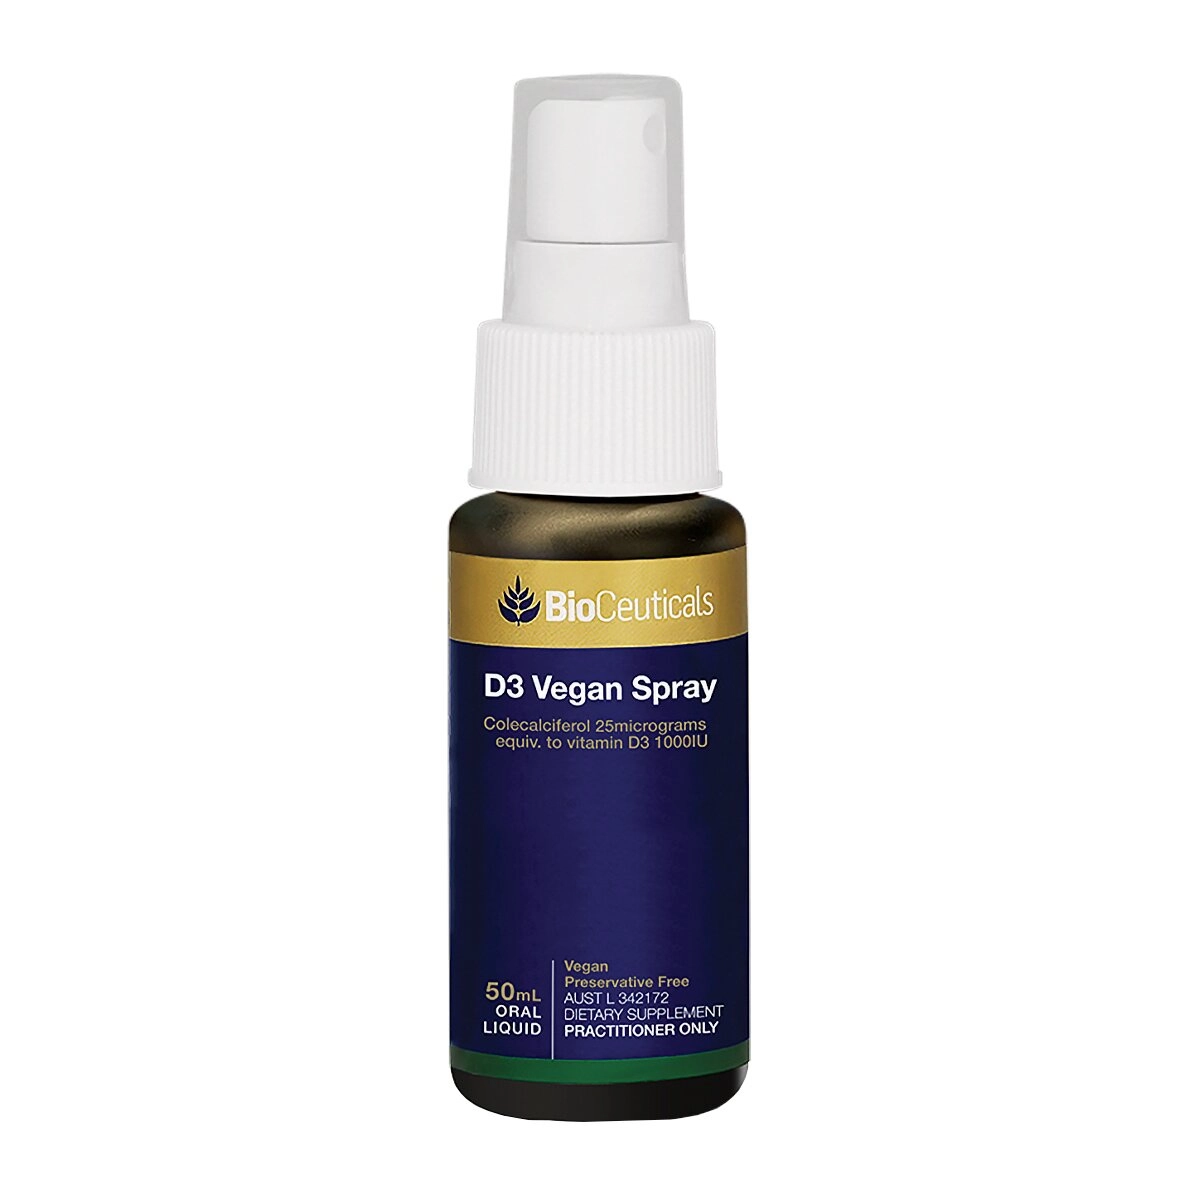 image of BioCeuticals D3 Vegan Spray 50ml with white background 